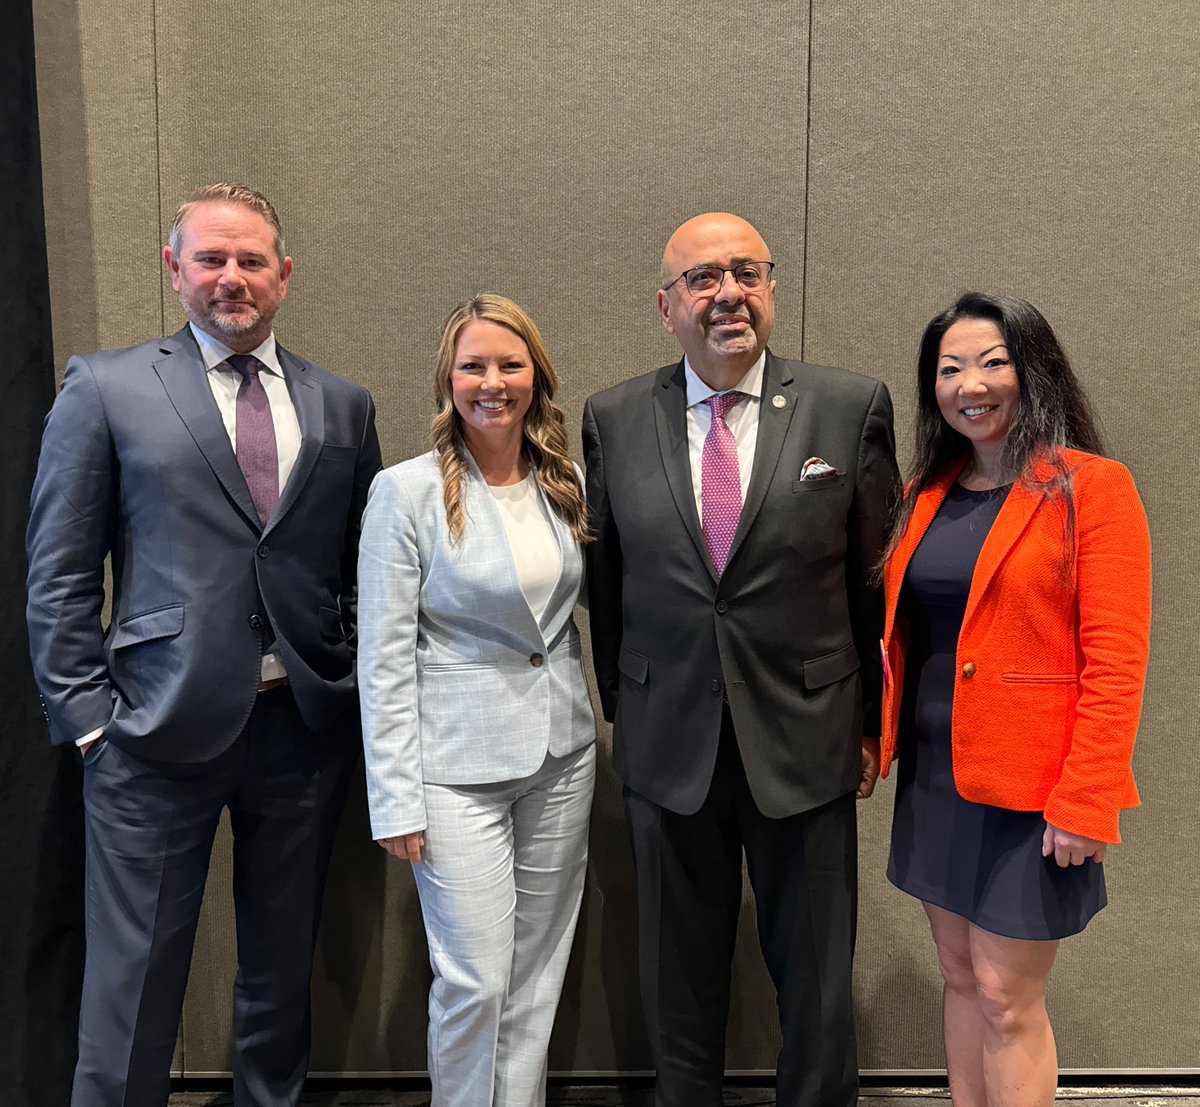 GM @adelh2o joined @MNWDWater's Joone Lopez, @sdcwa's Dan Denham and @TurlockID's Michelle Reimers for a conversation in front of a packed @ACWAWater crowd on attracting the best and brightest workforce and navigating challenges ahead for the water industry. #ACWAConf